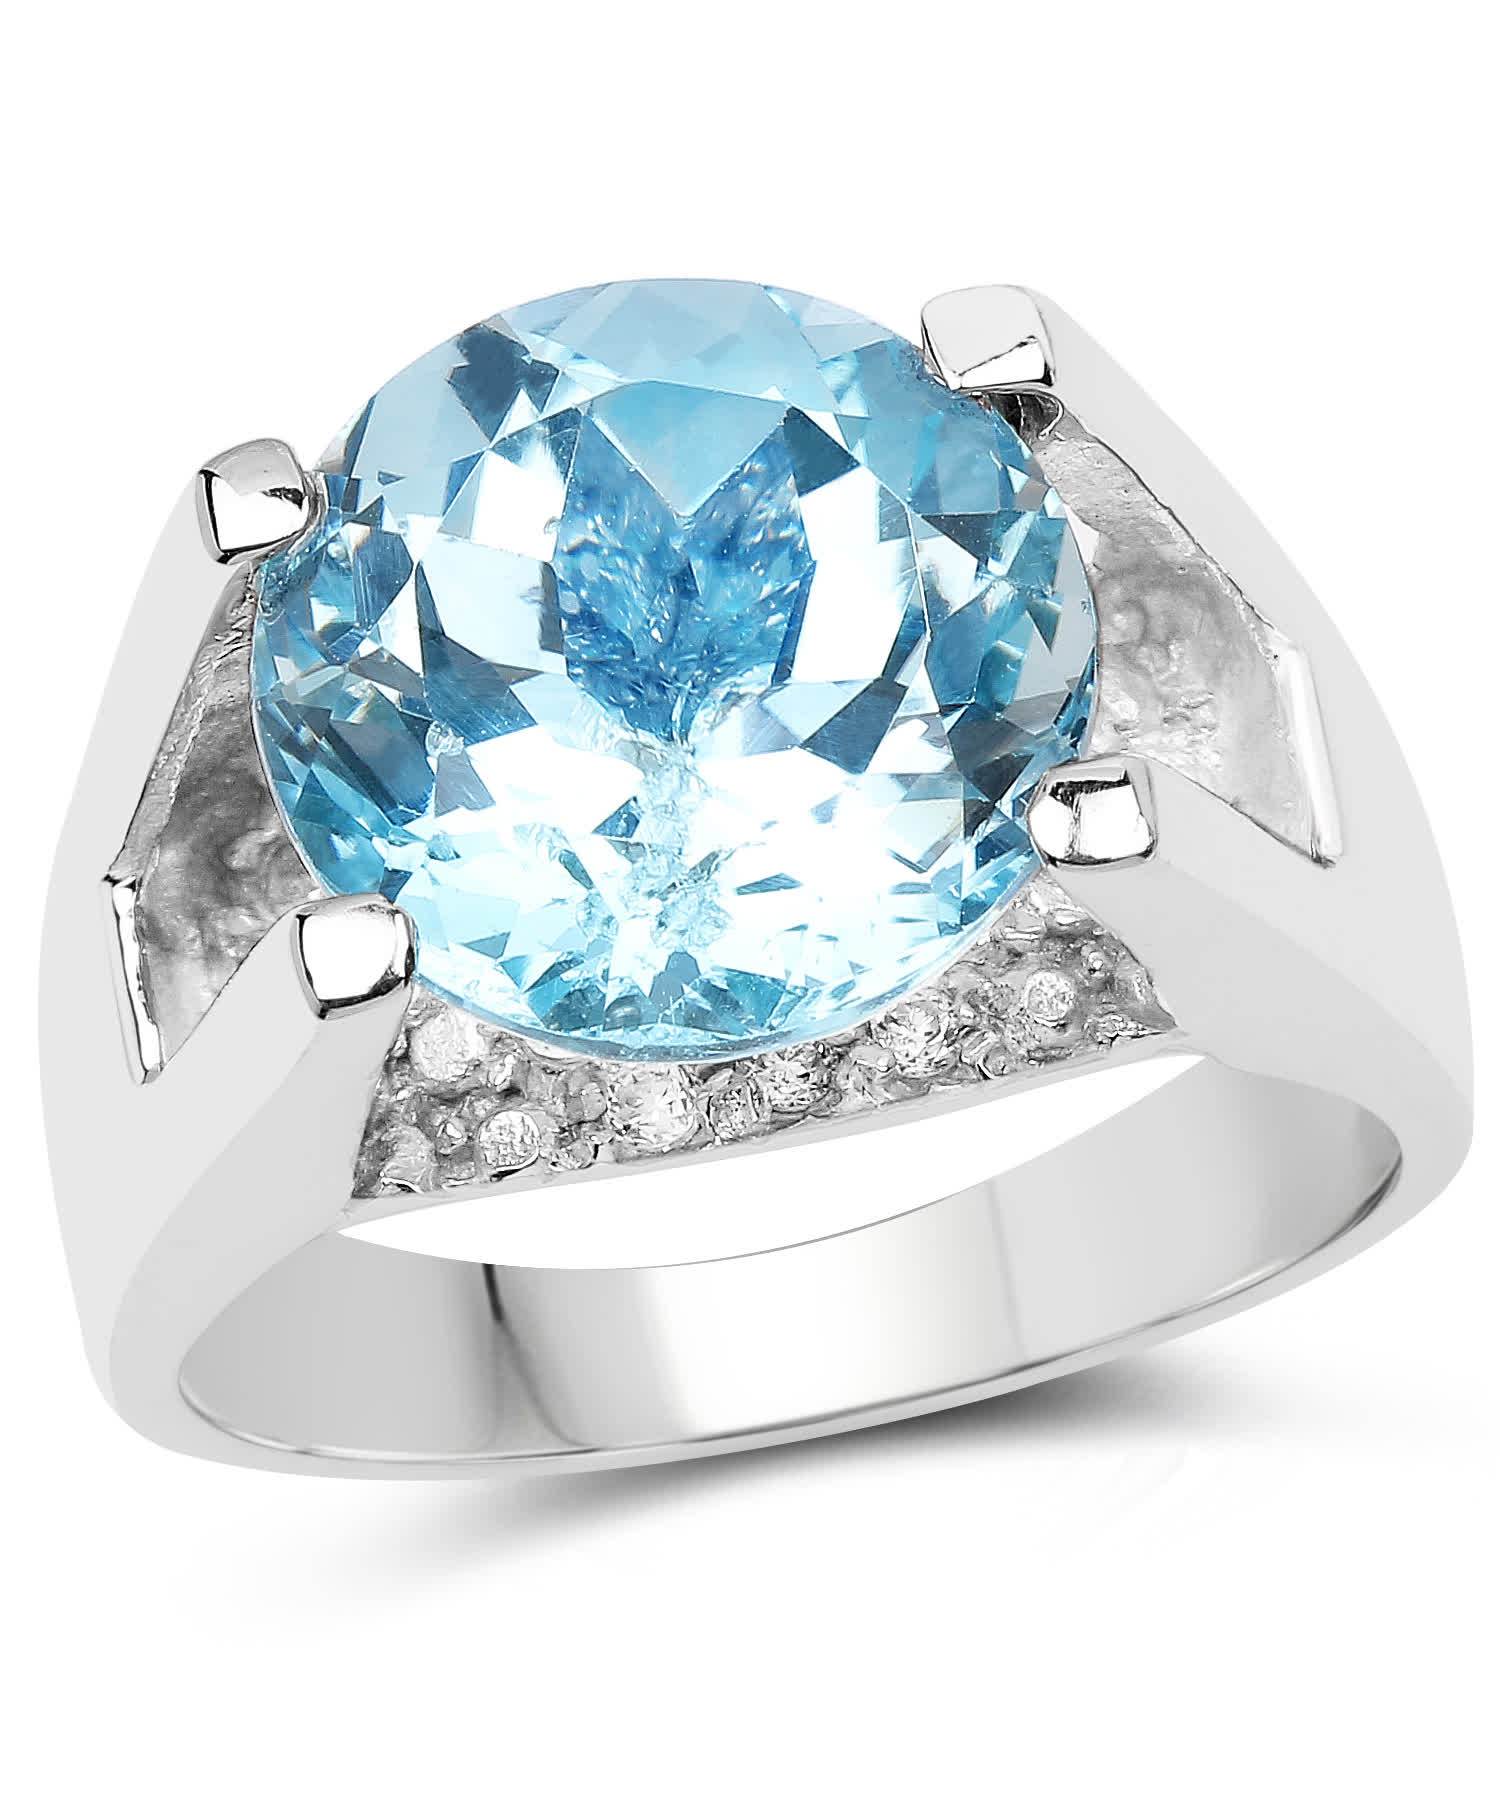 7.21ctw Natural Sky Blue Topaz and Brilliant Cut Cubic Zirconia Rhodium Plated 925 Sterling Silver Cocktail Ring View 1